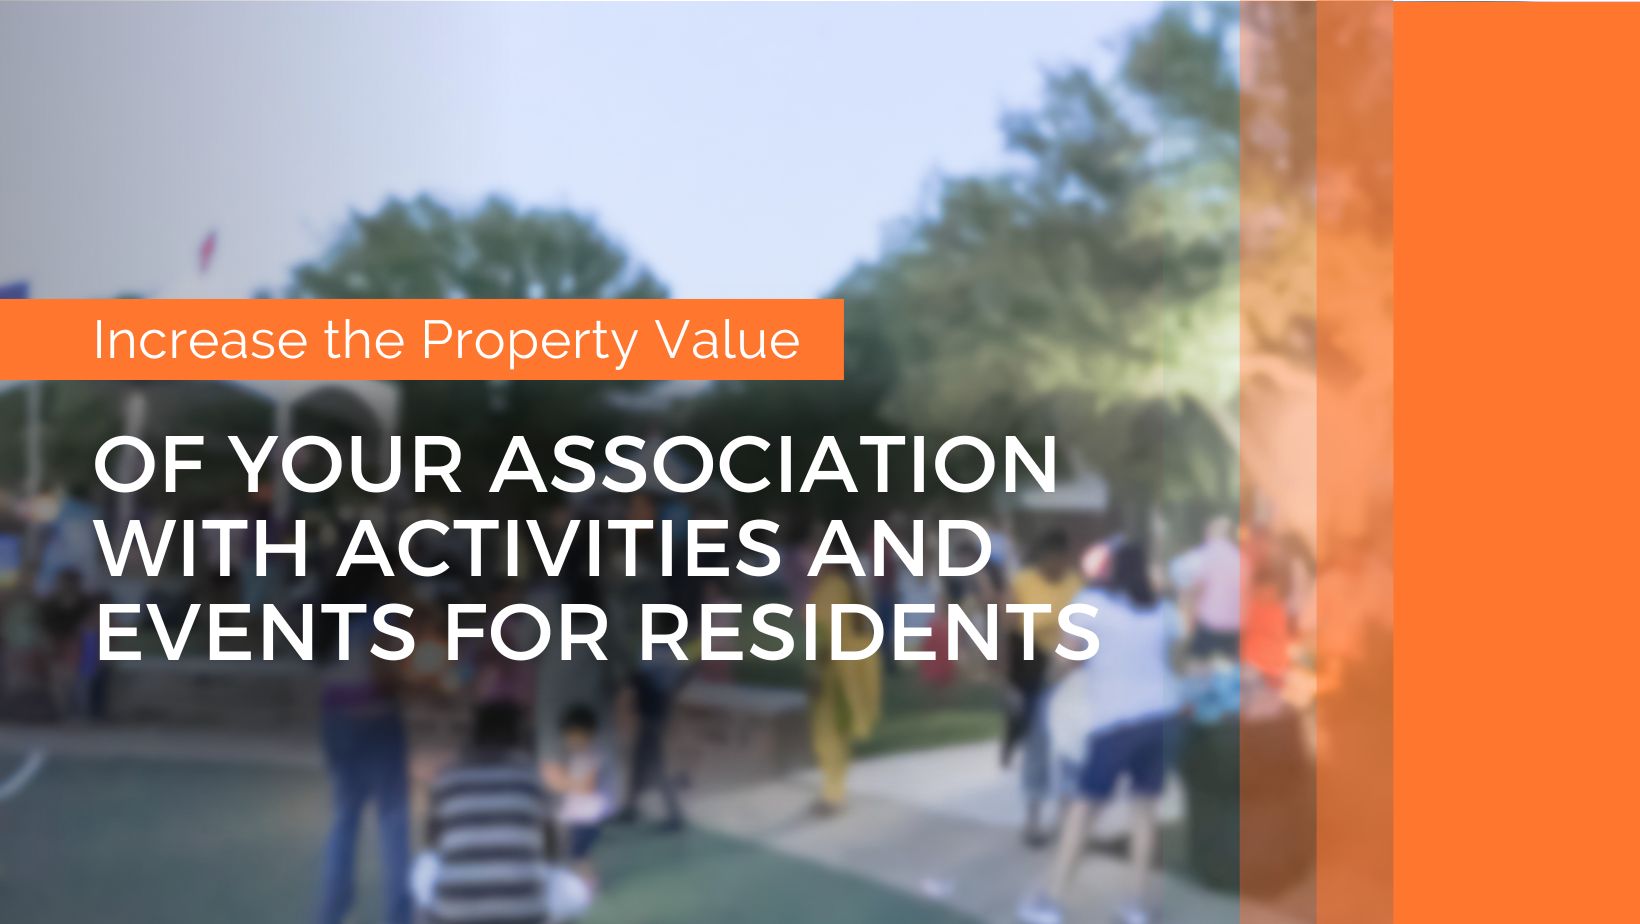 Increase Property Value of Your Association with Activities and Events for Residents 